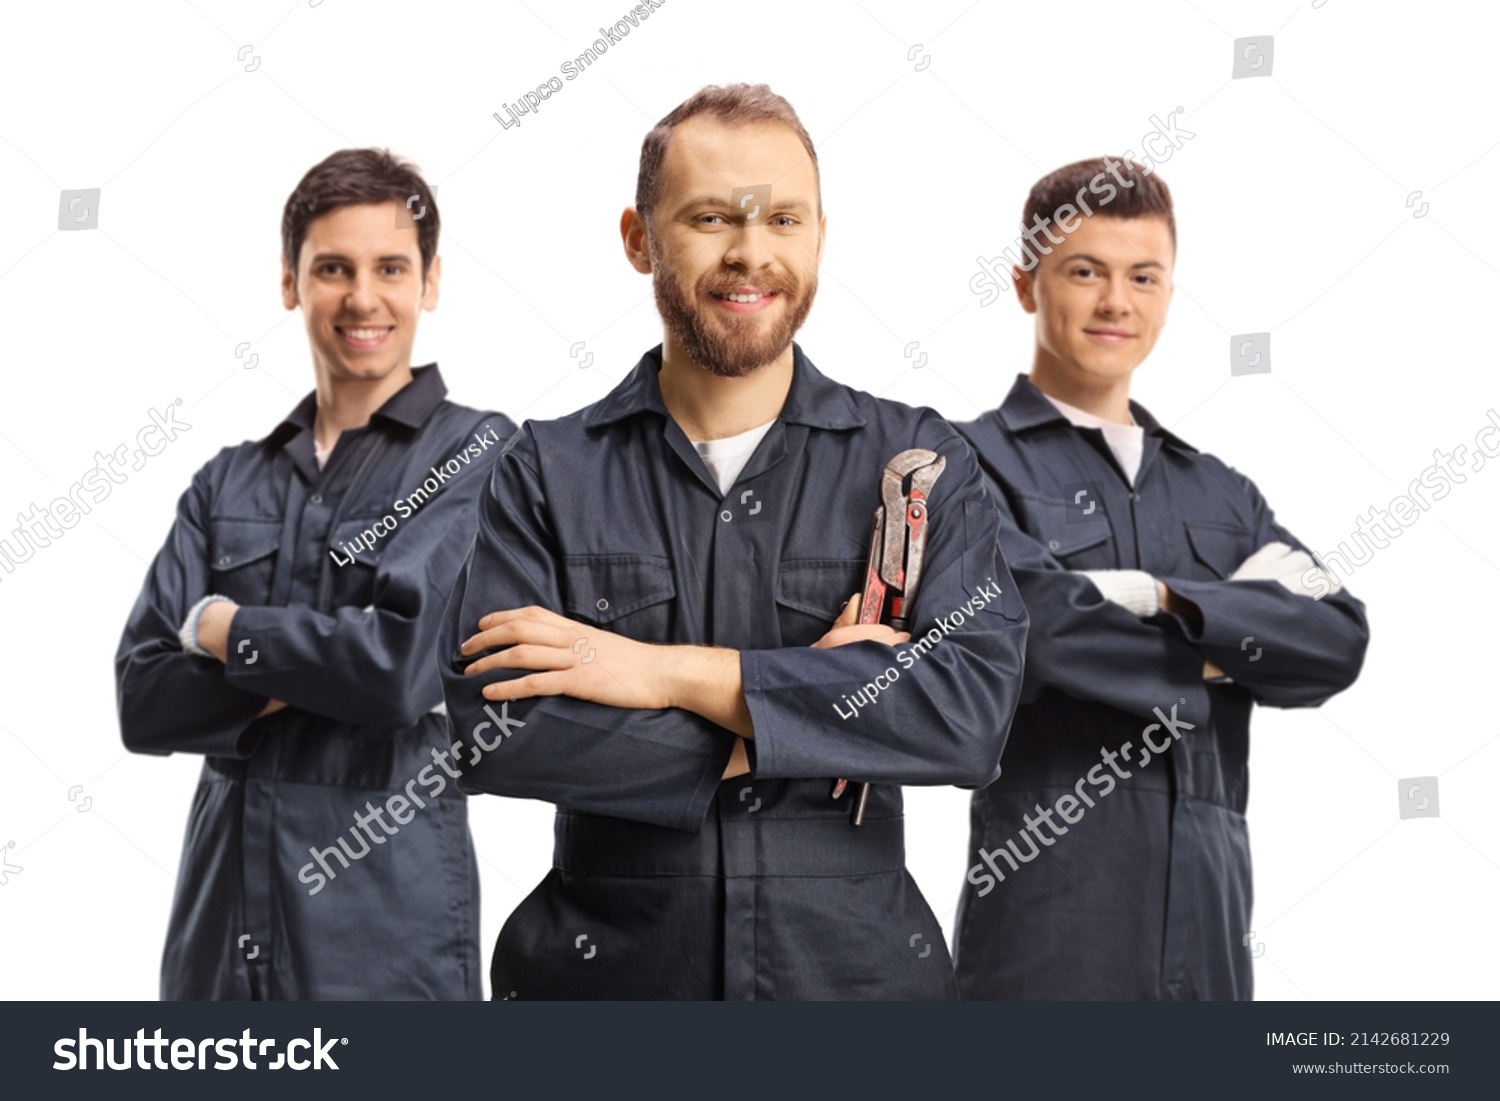 Team of plumbers in uniforms looking at camera isolated on white background #2142681229